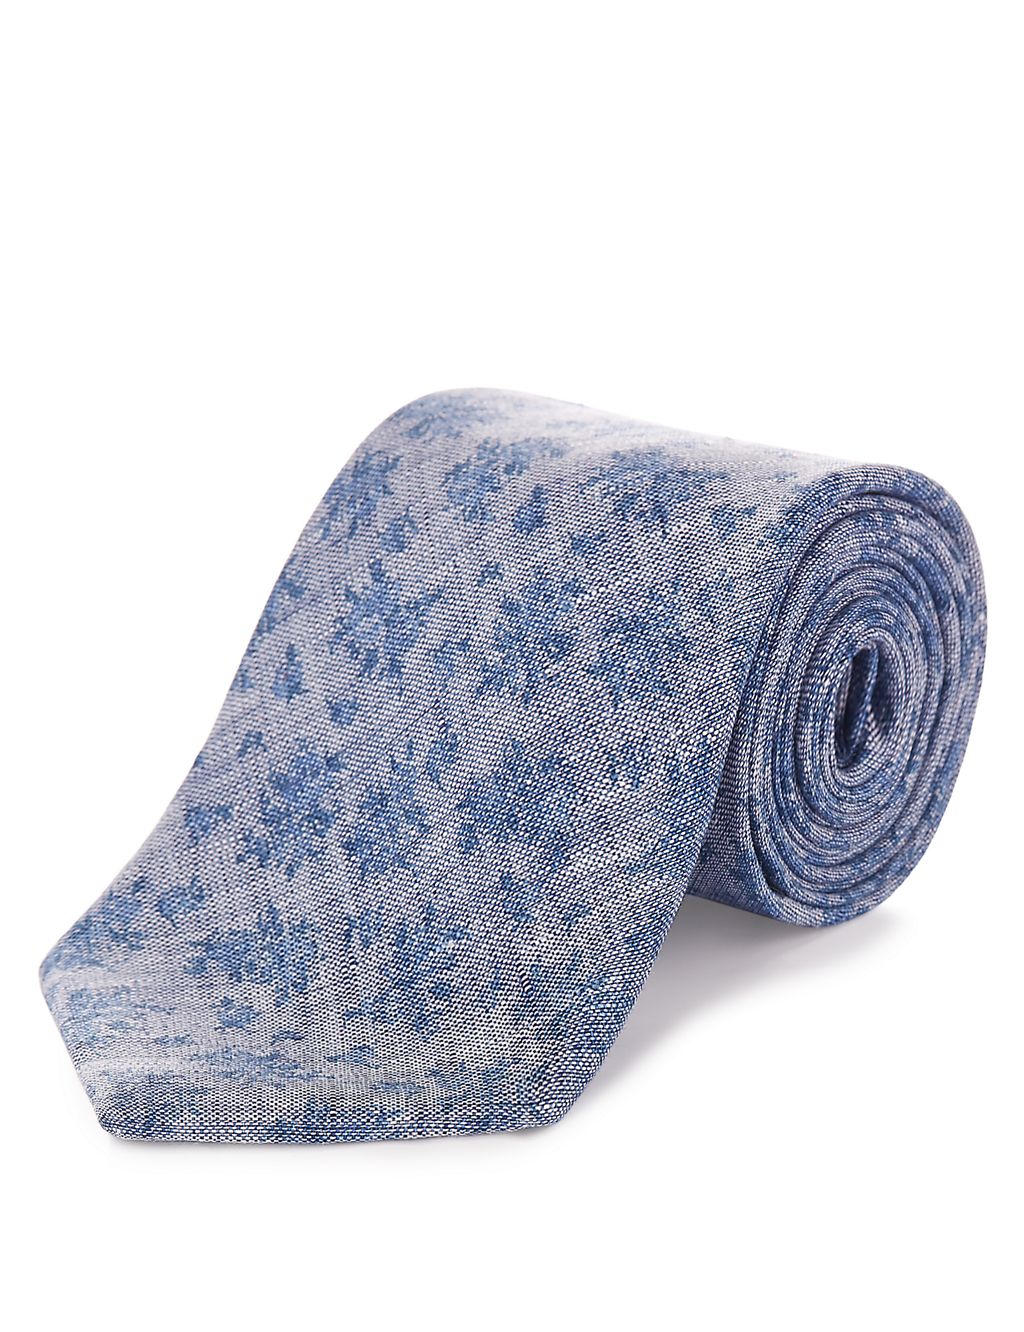 Pure Linen Floral Tie 1 of 1